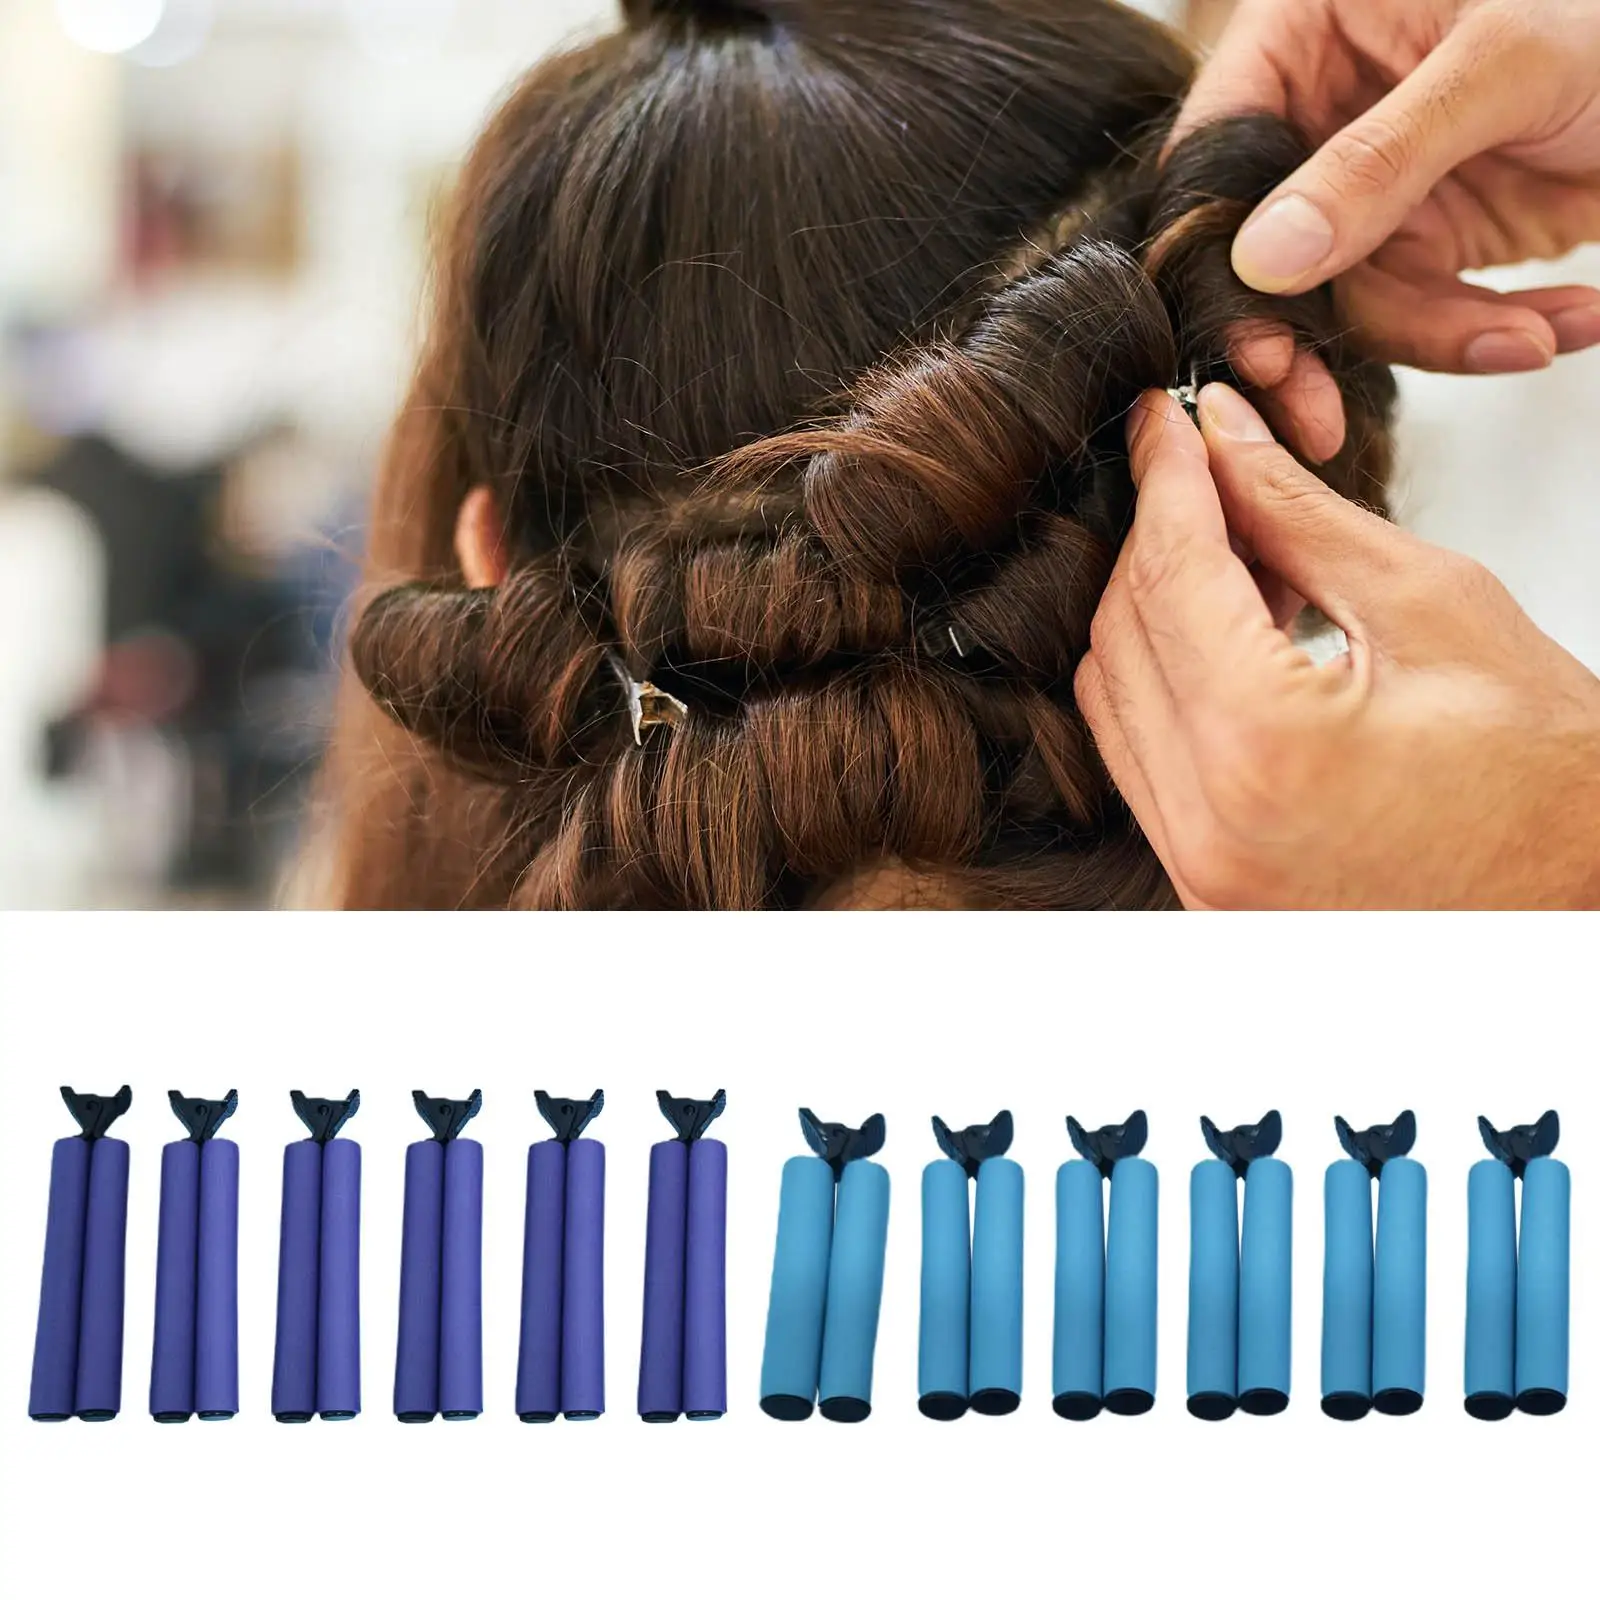 Het Insultion Clip 12 Pieces Hirdressing Clip Hirdressing Tools Without Trce Perm Fixing Sponge Clips for Beuty Slon